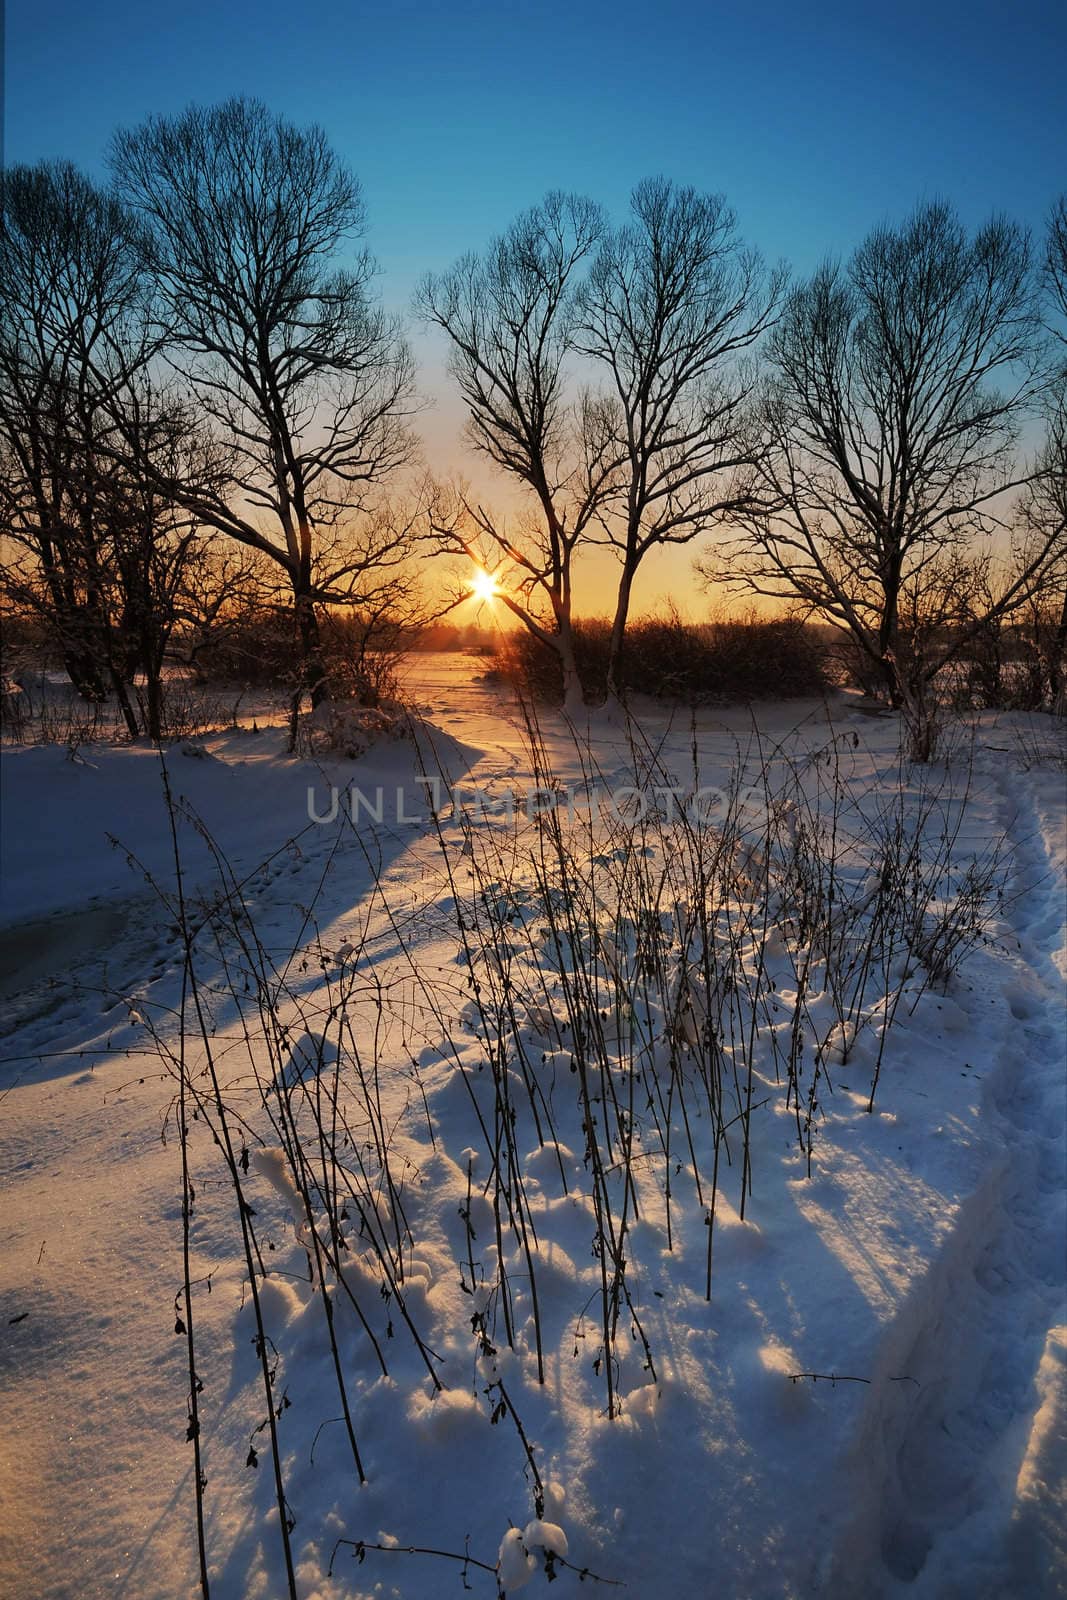 Beautiful winter sunset with silhouette of trees in the snow 